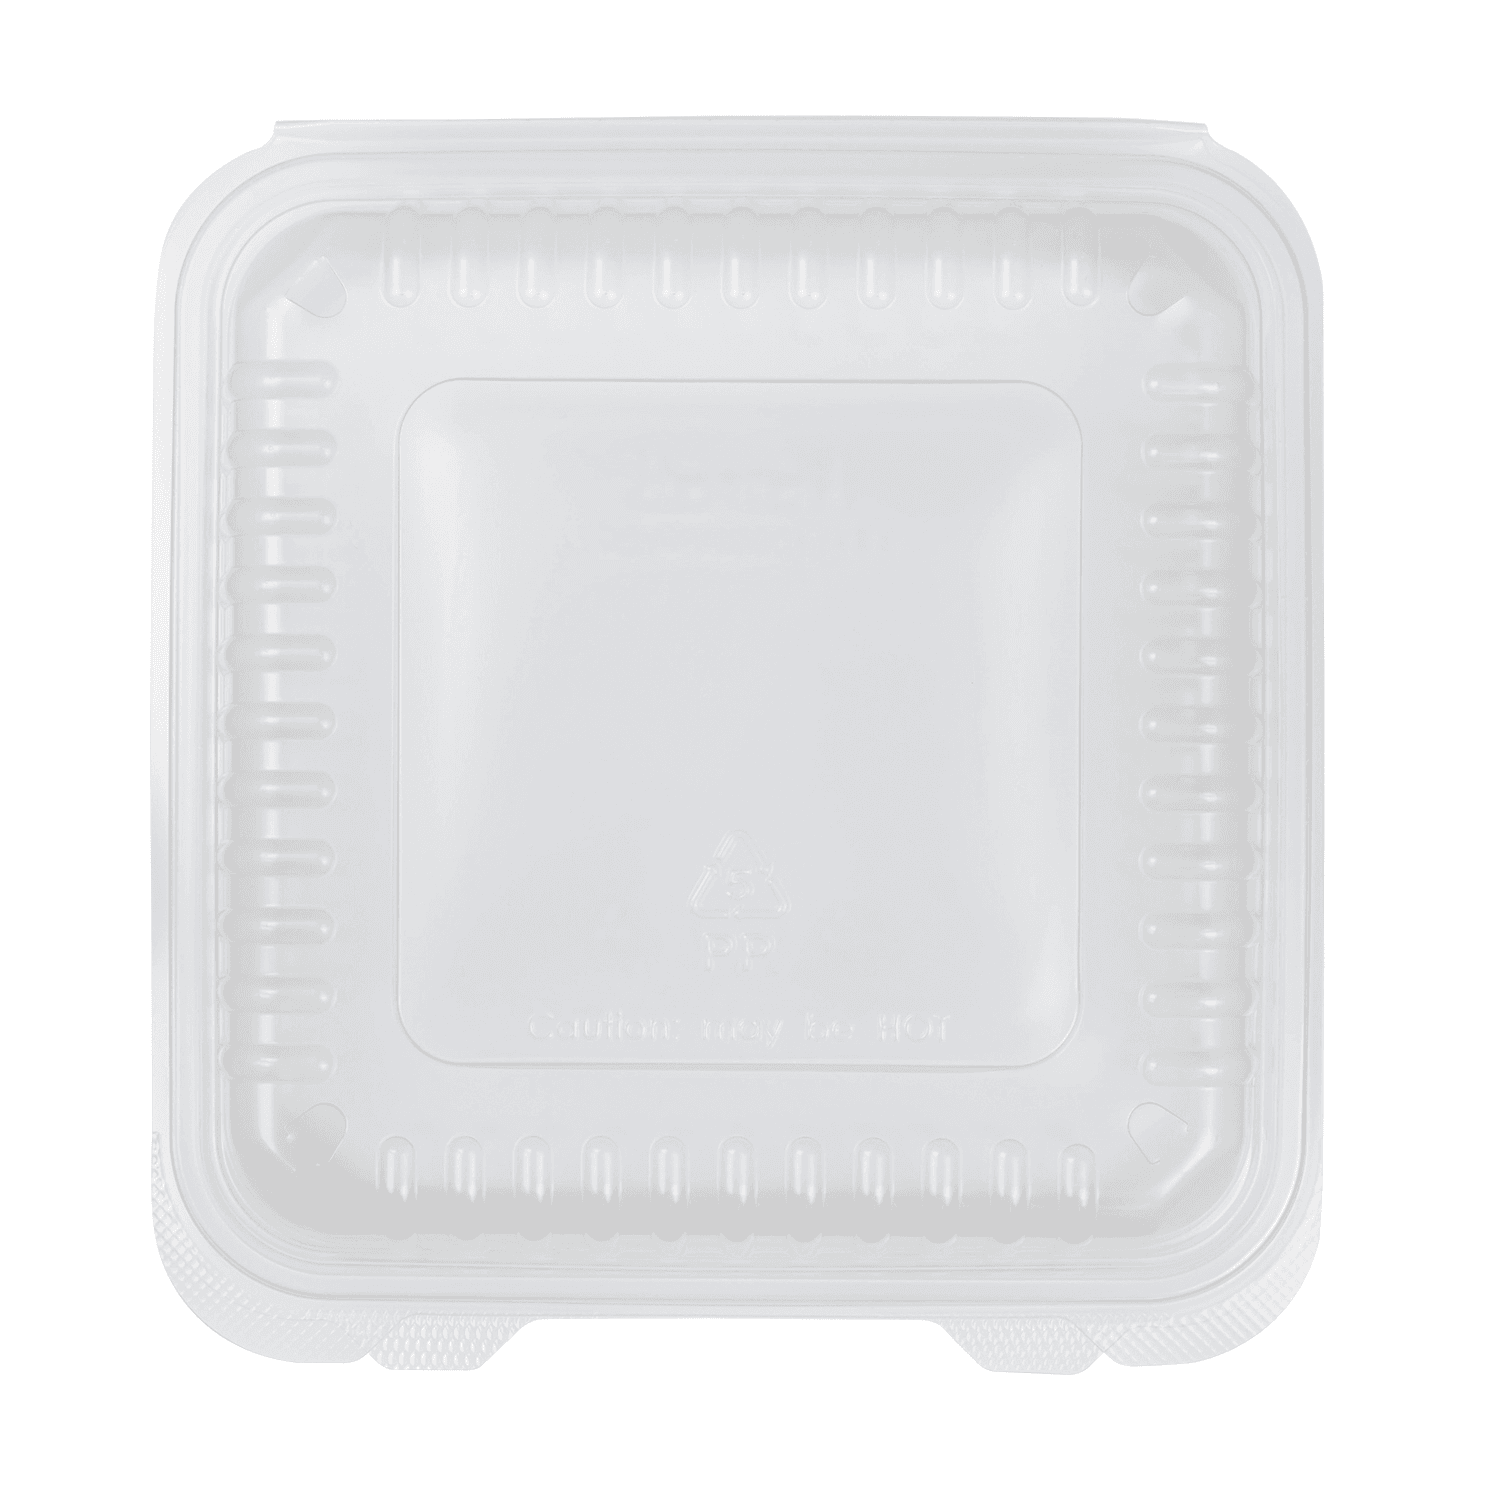 Karat 9"x 9" PP Plastic Hinged Containers